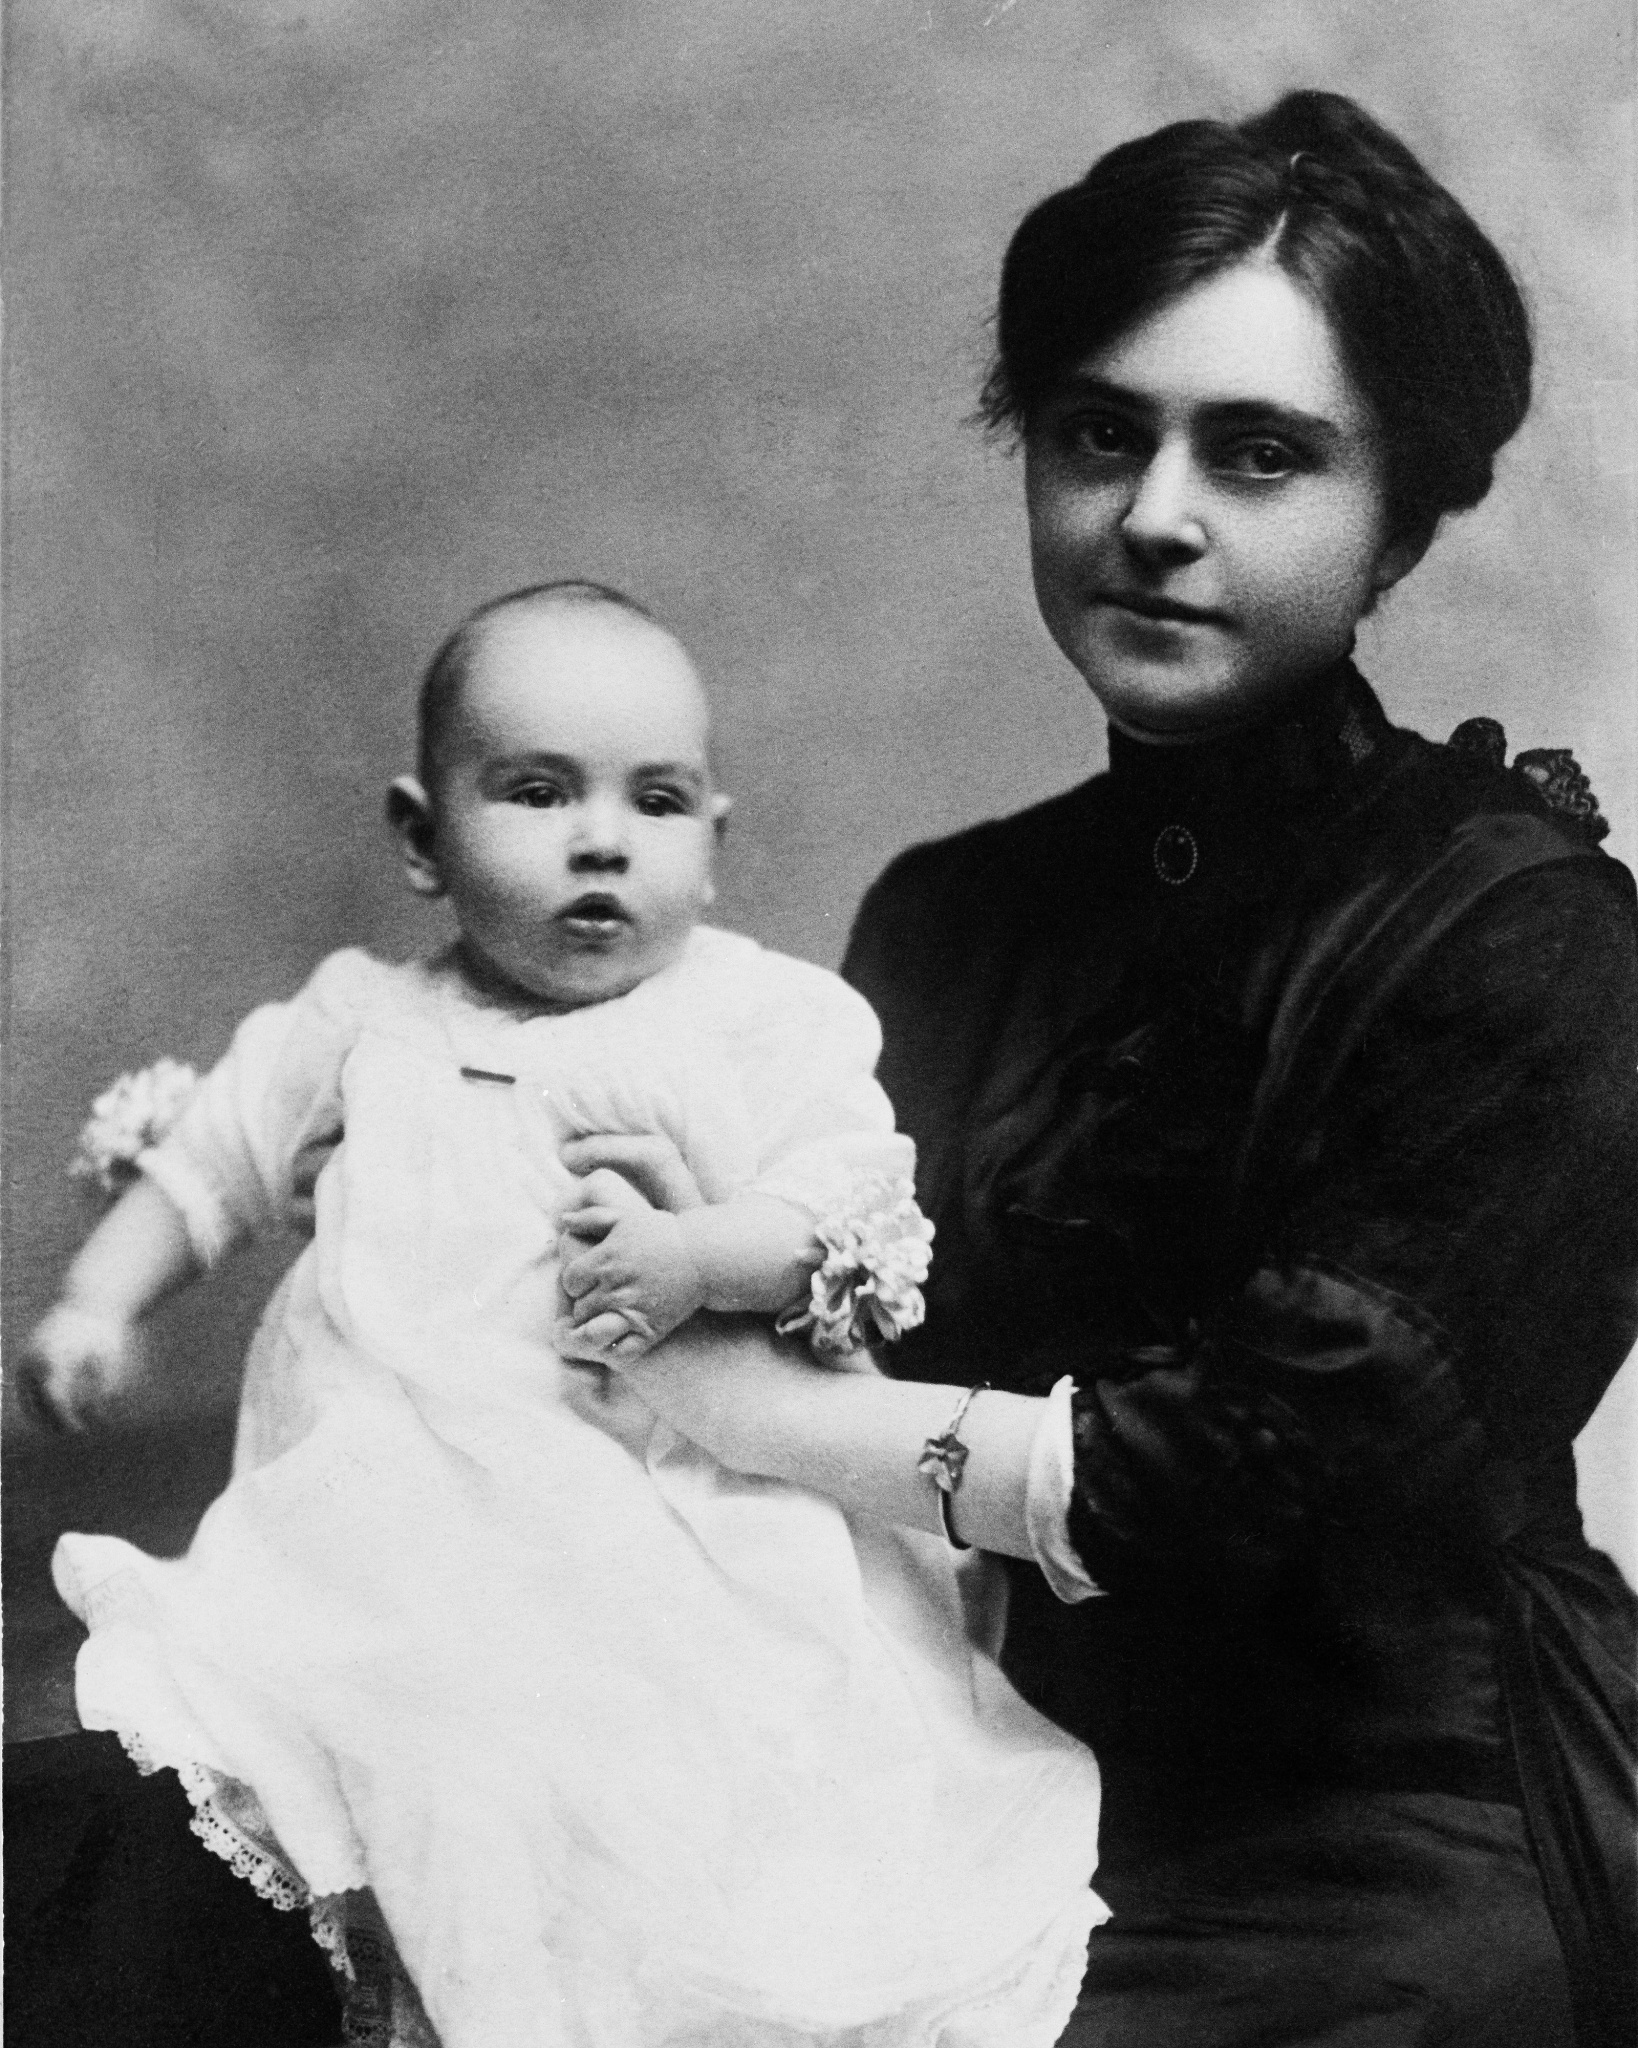 Photo of of Mary Gaston holding Bob Jones Jr. as a baby on her lap for a formal portrait. 1913